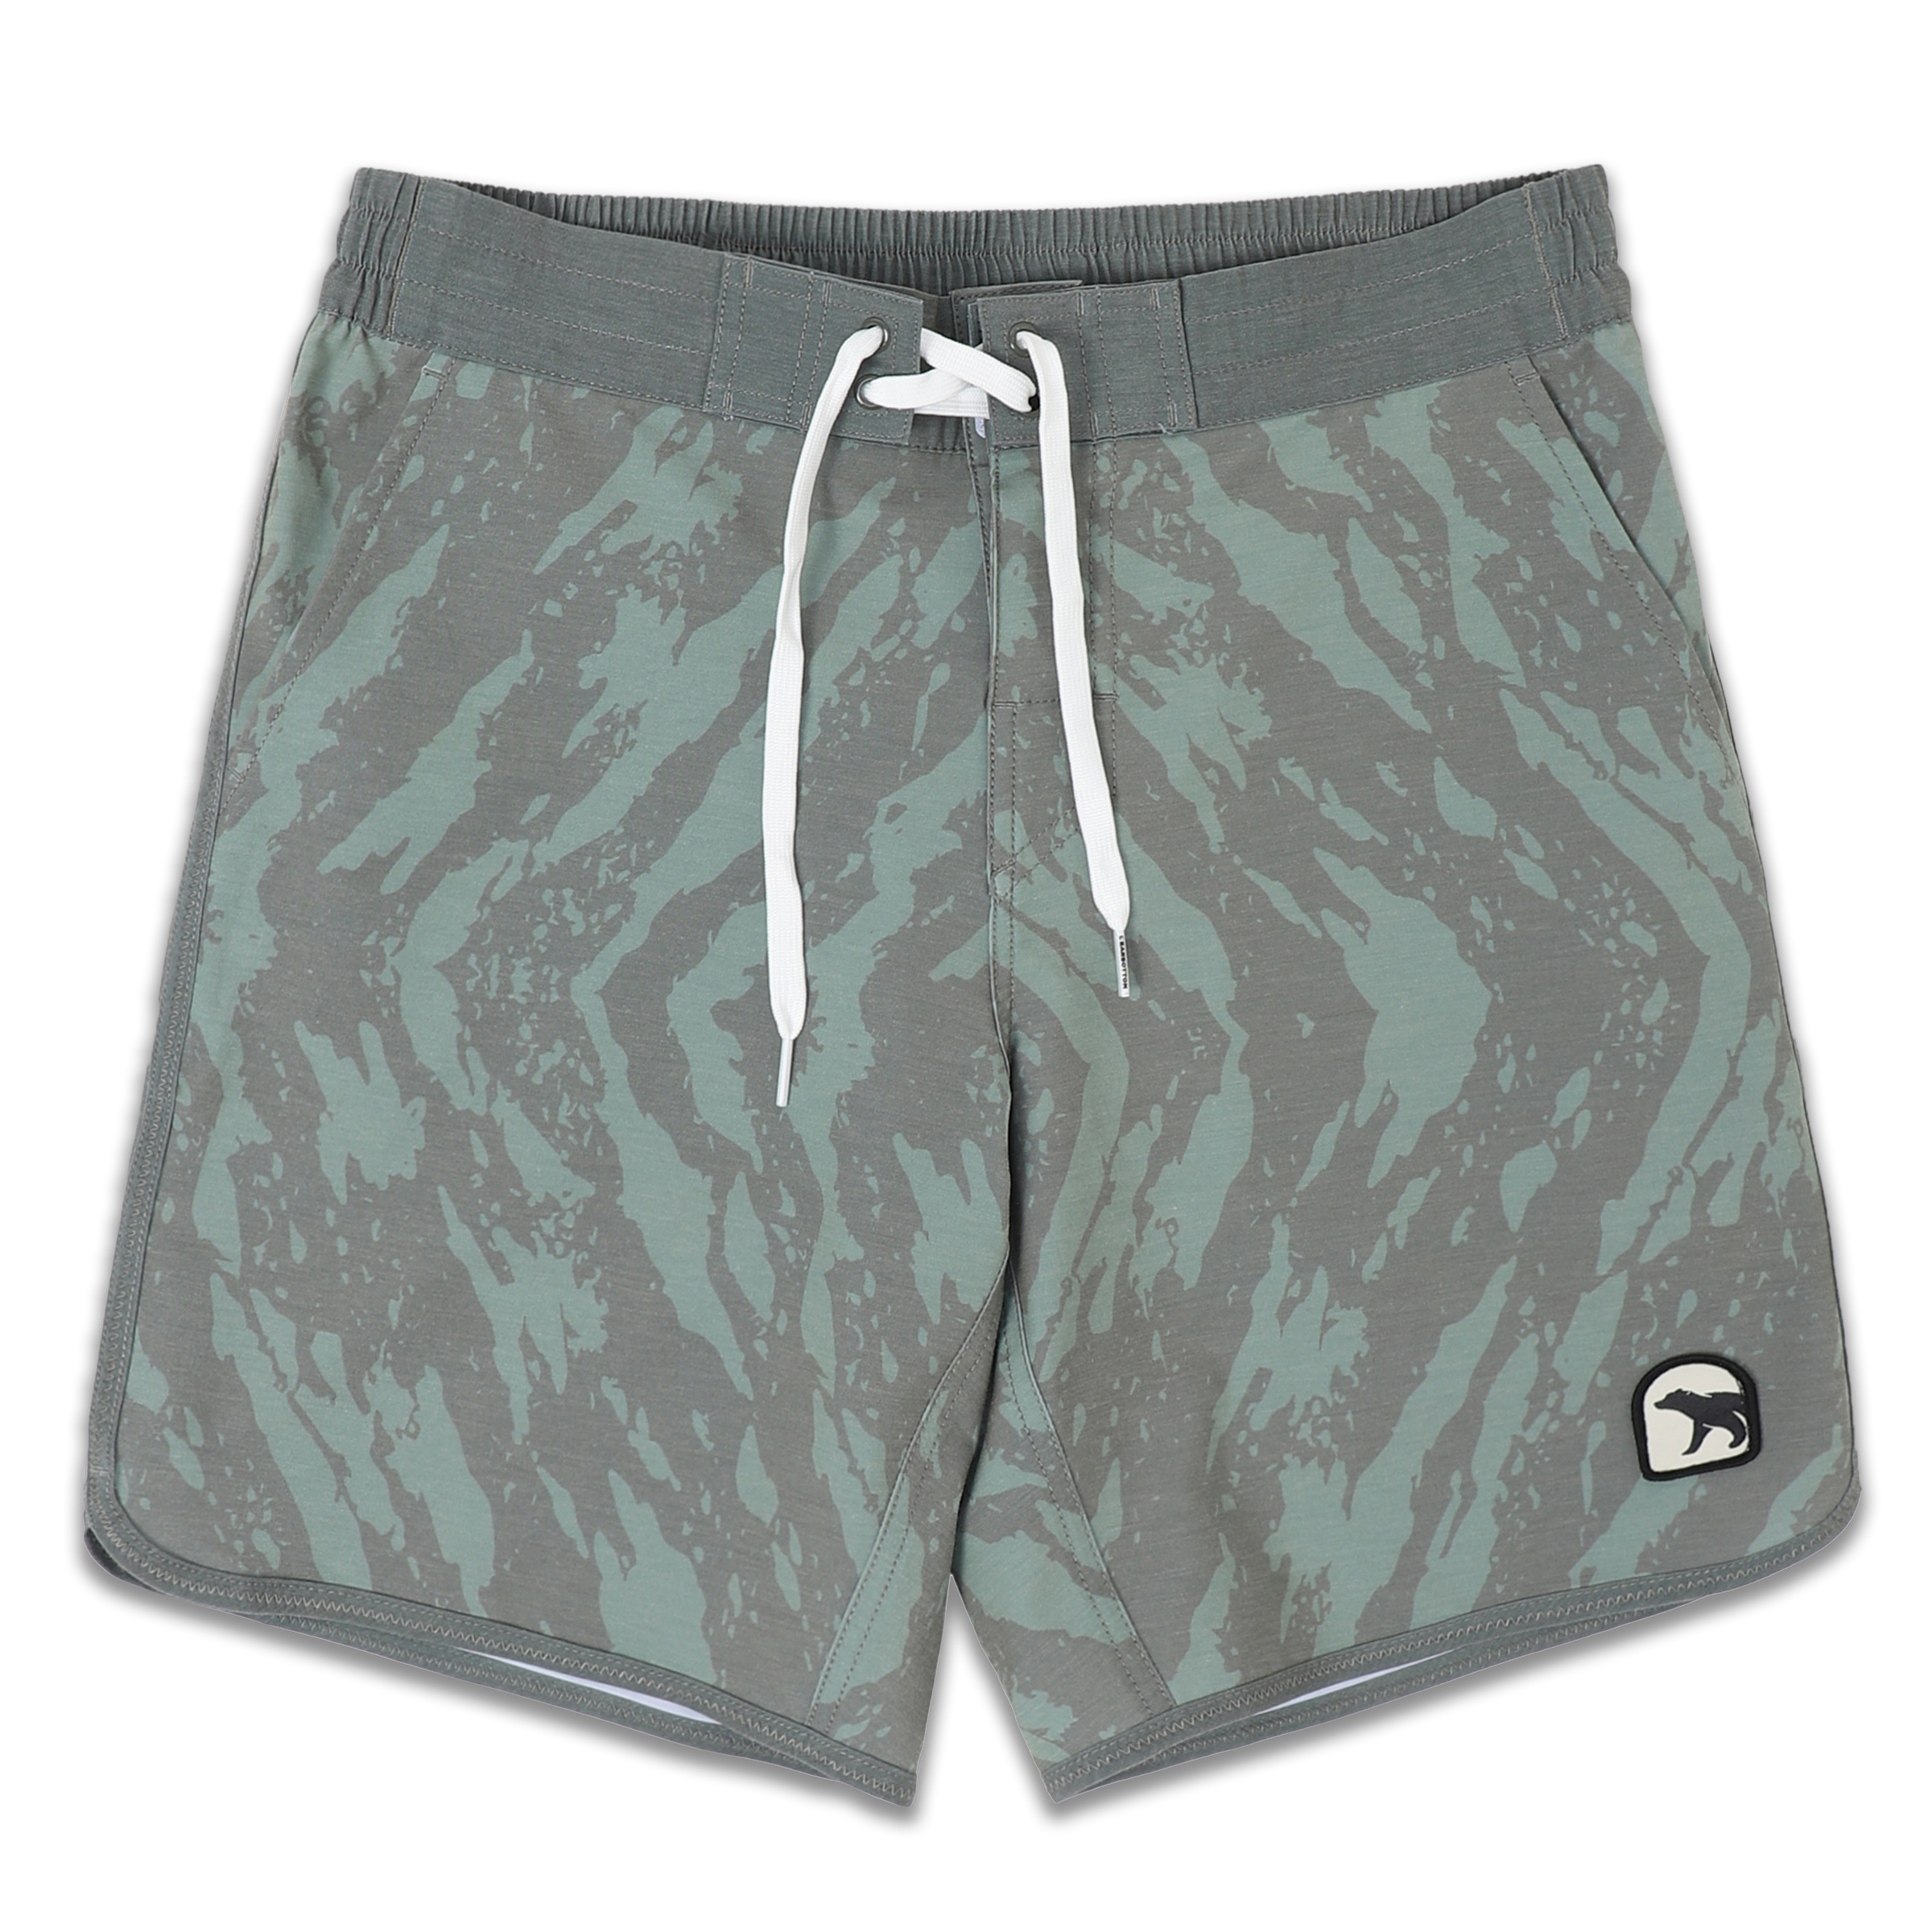 Board Short 8" Trail print in green with darker green splatters with flat front waistband and a white drawstring, elastic back waistband, and patch bear logo on bottom left leg